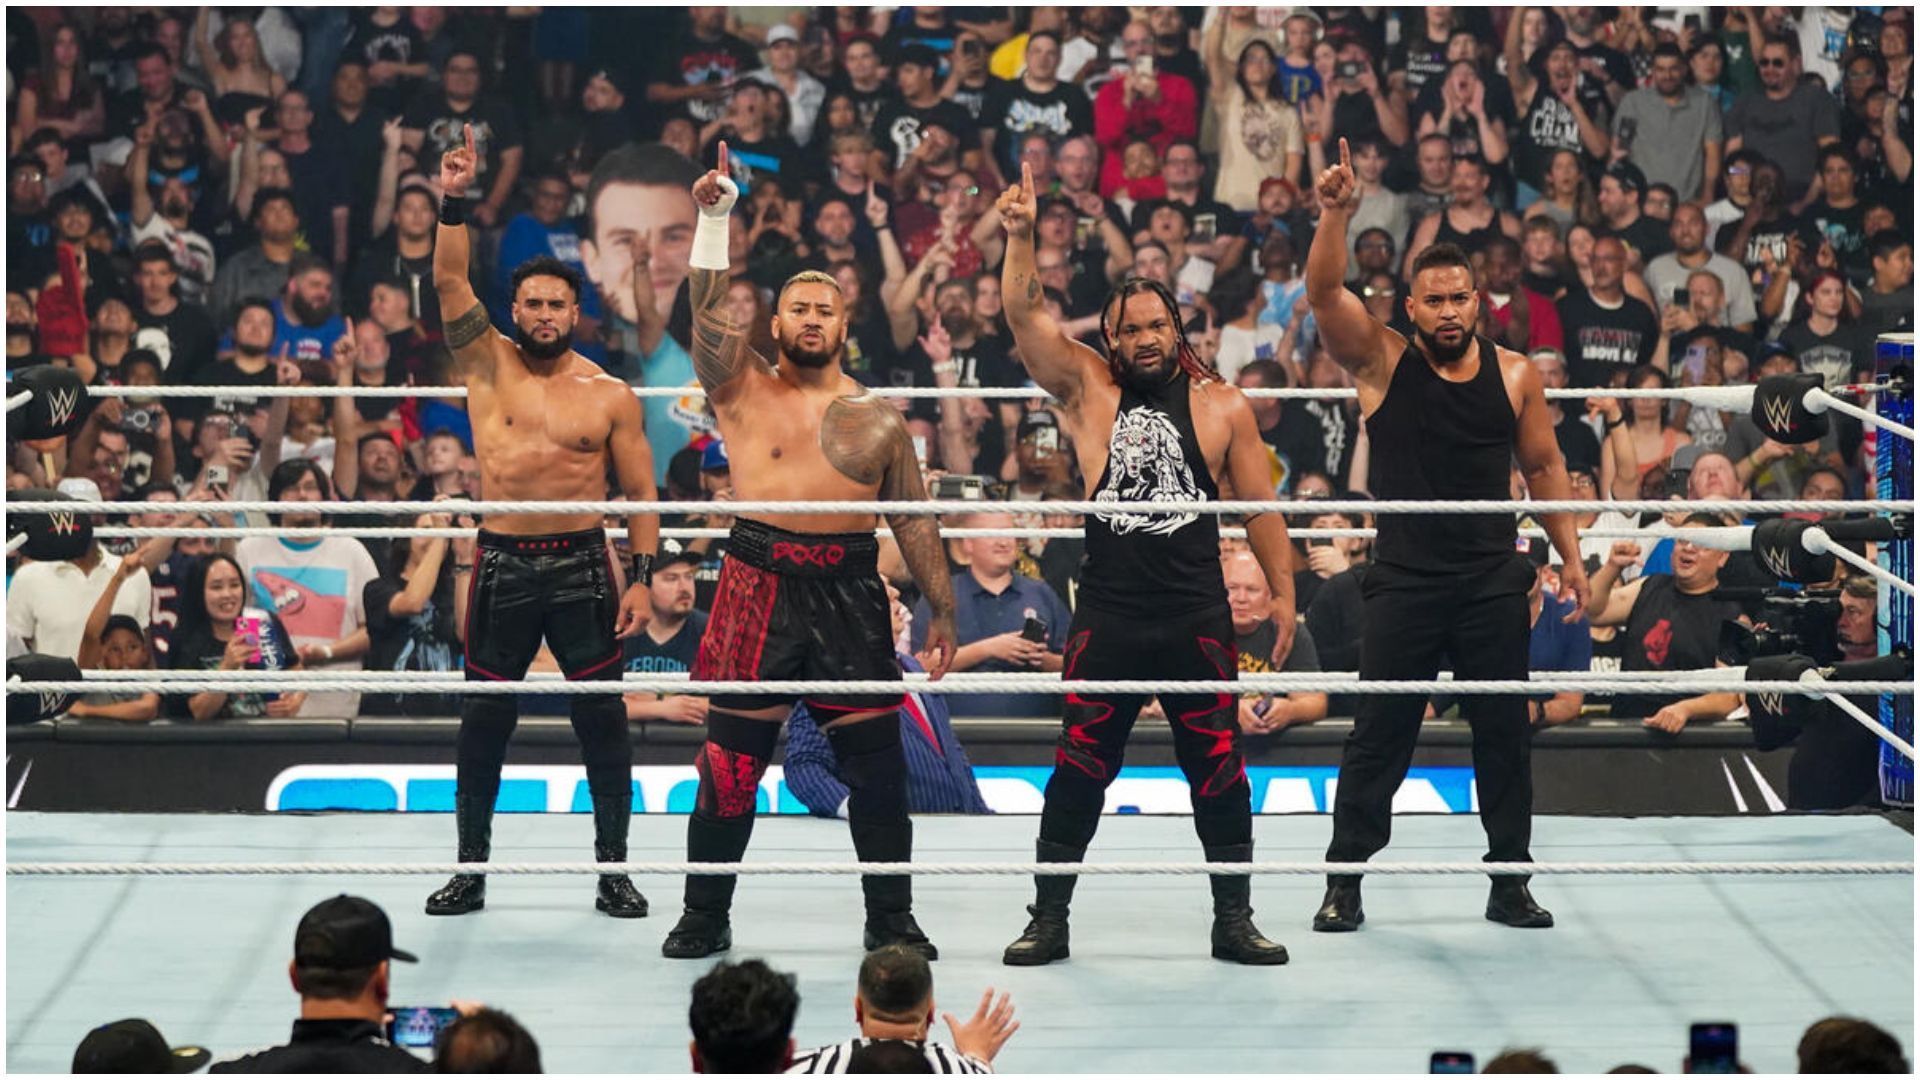 The new Bloodline on WWE SmackDown! (Image source: WWE.com)